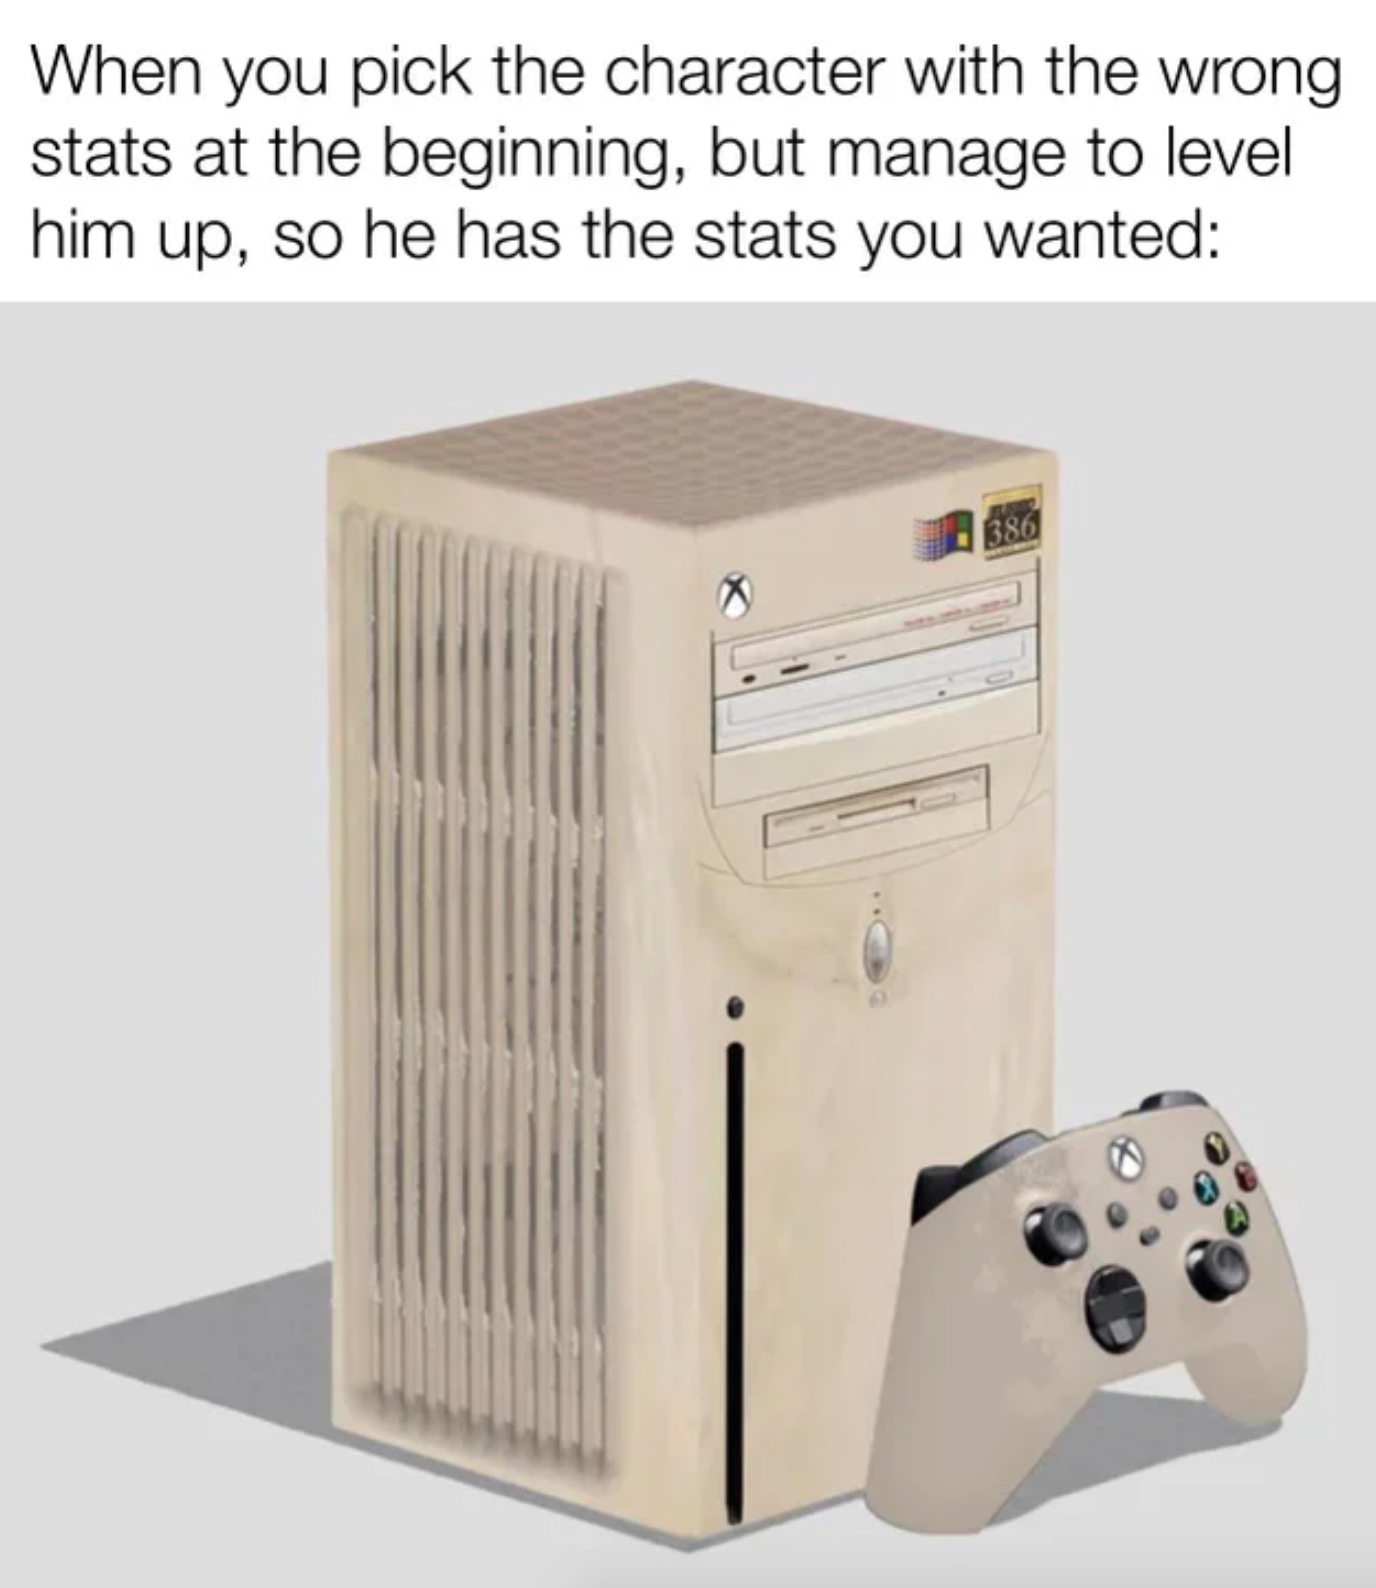 funny gaming memes - xbox series x retro - When you pick the character with the wrong stats at the beginning, but manage to level him up, so he has the stats you wanted